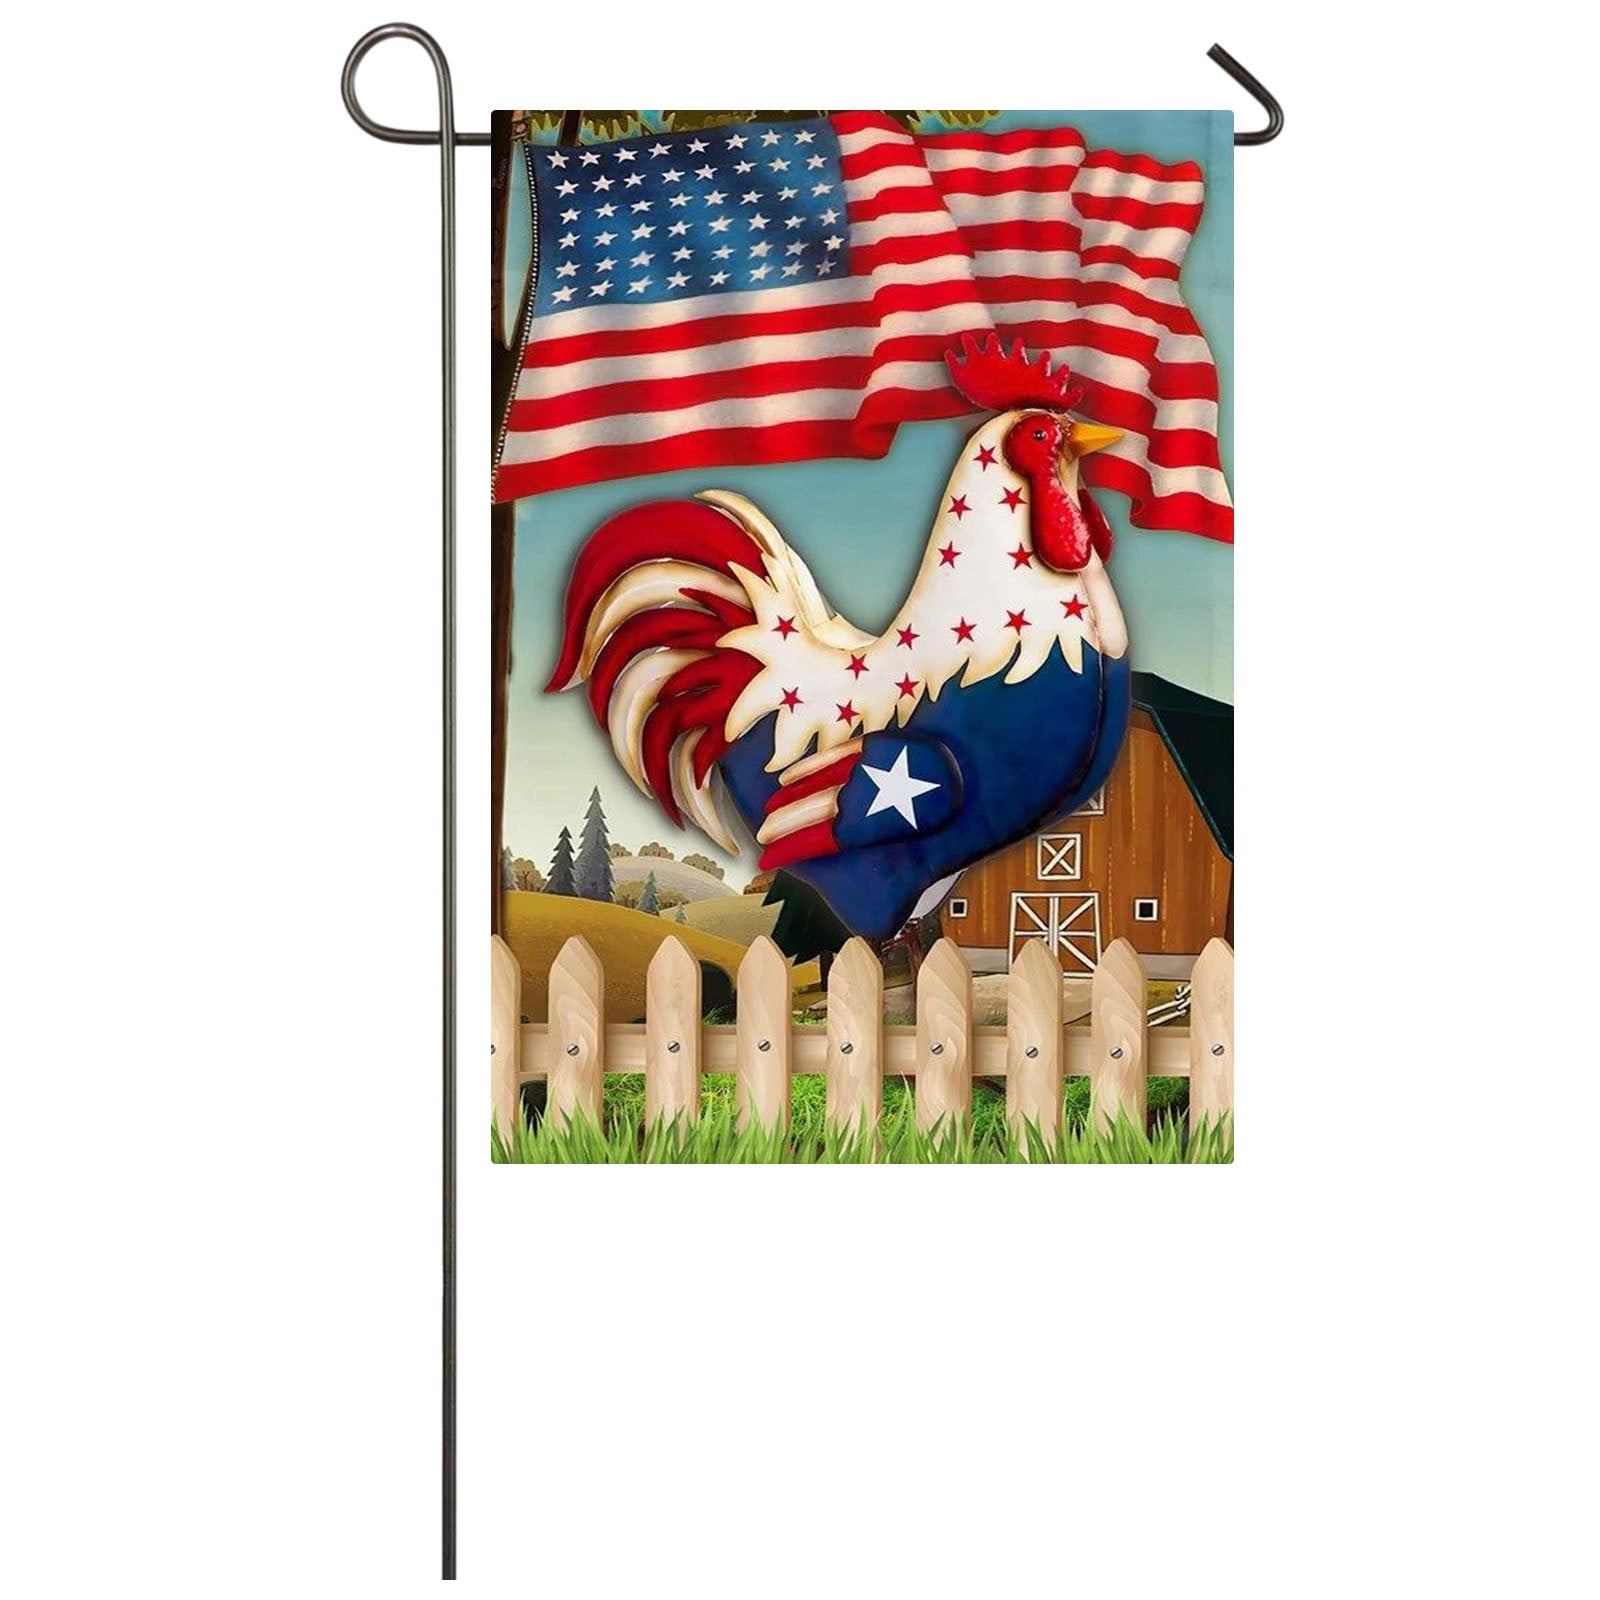 MODEL HOMES HOME MODELS 3x5ft flag sign superior quality fade resistant 